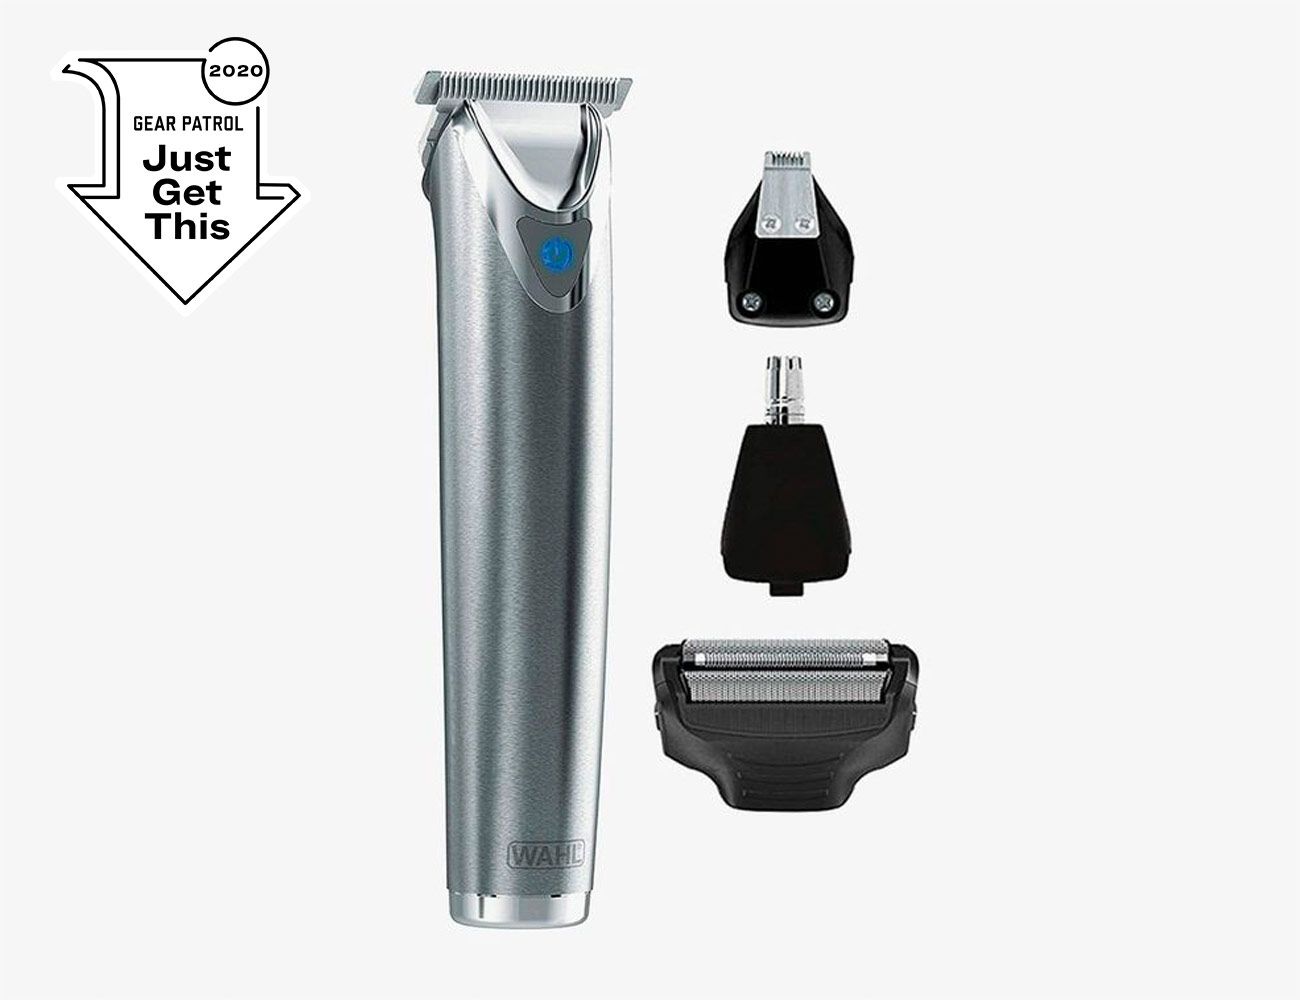 what are the best beard trimmers